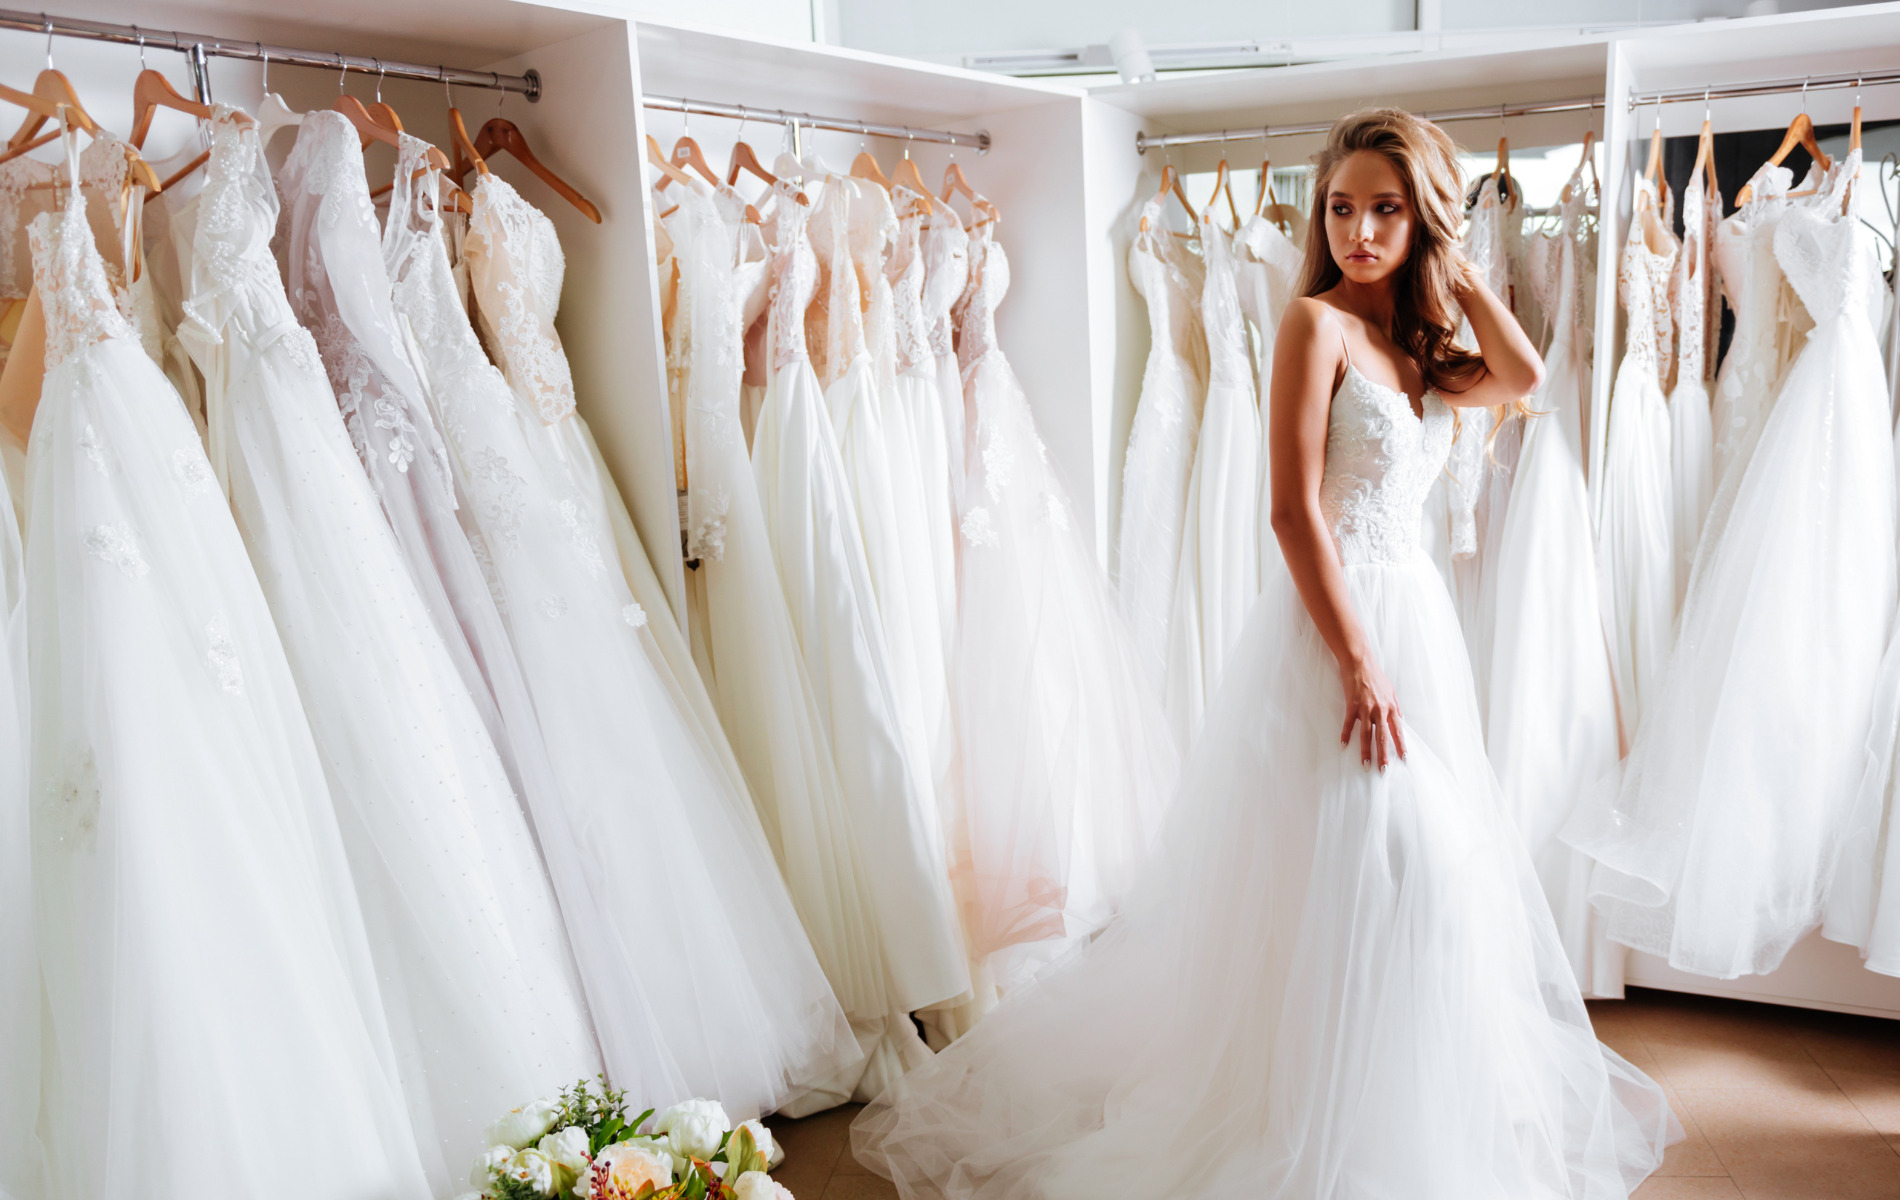 woman in bridal dress posing in a room full of other bridal dresses